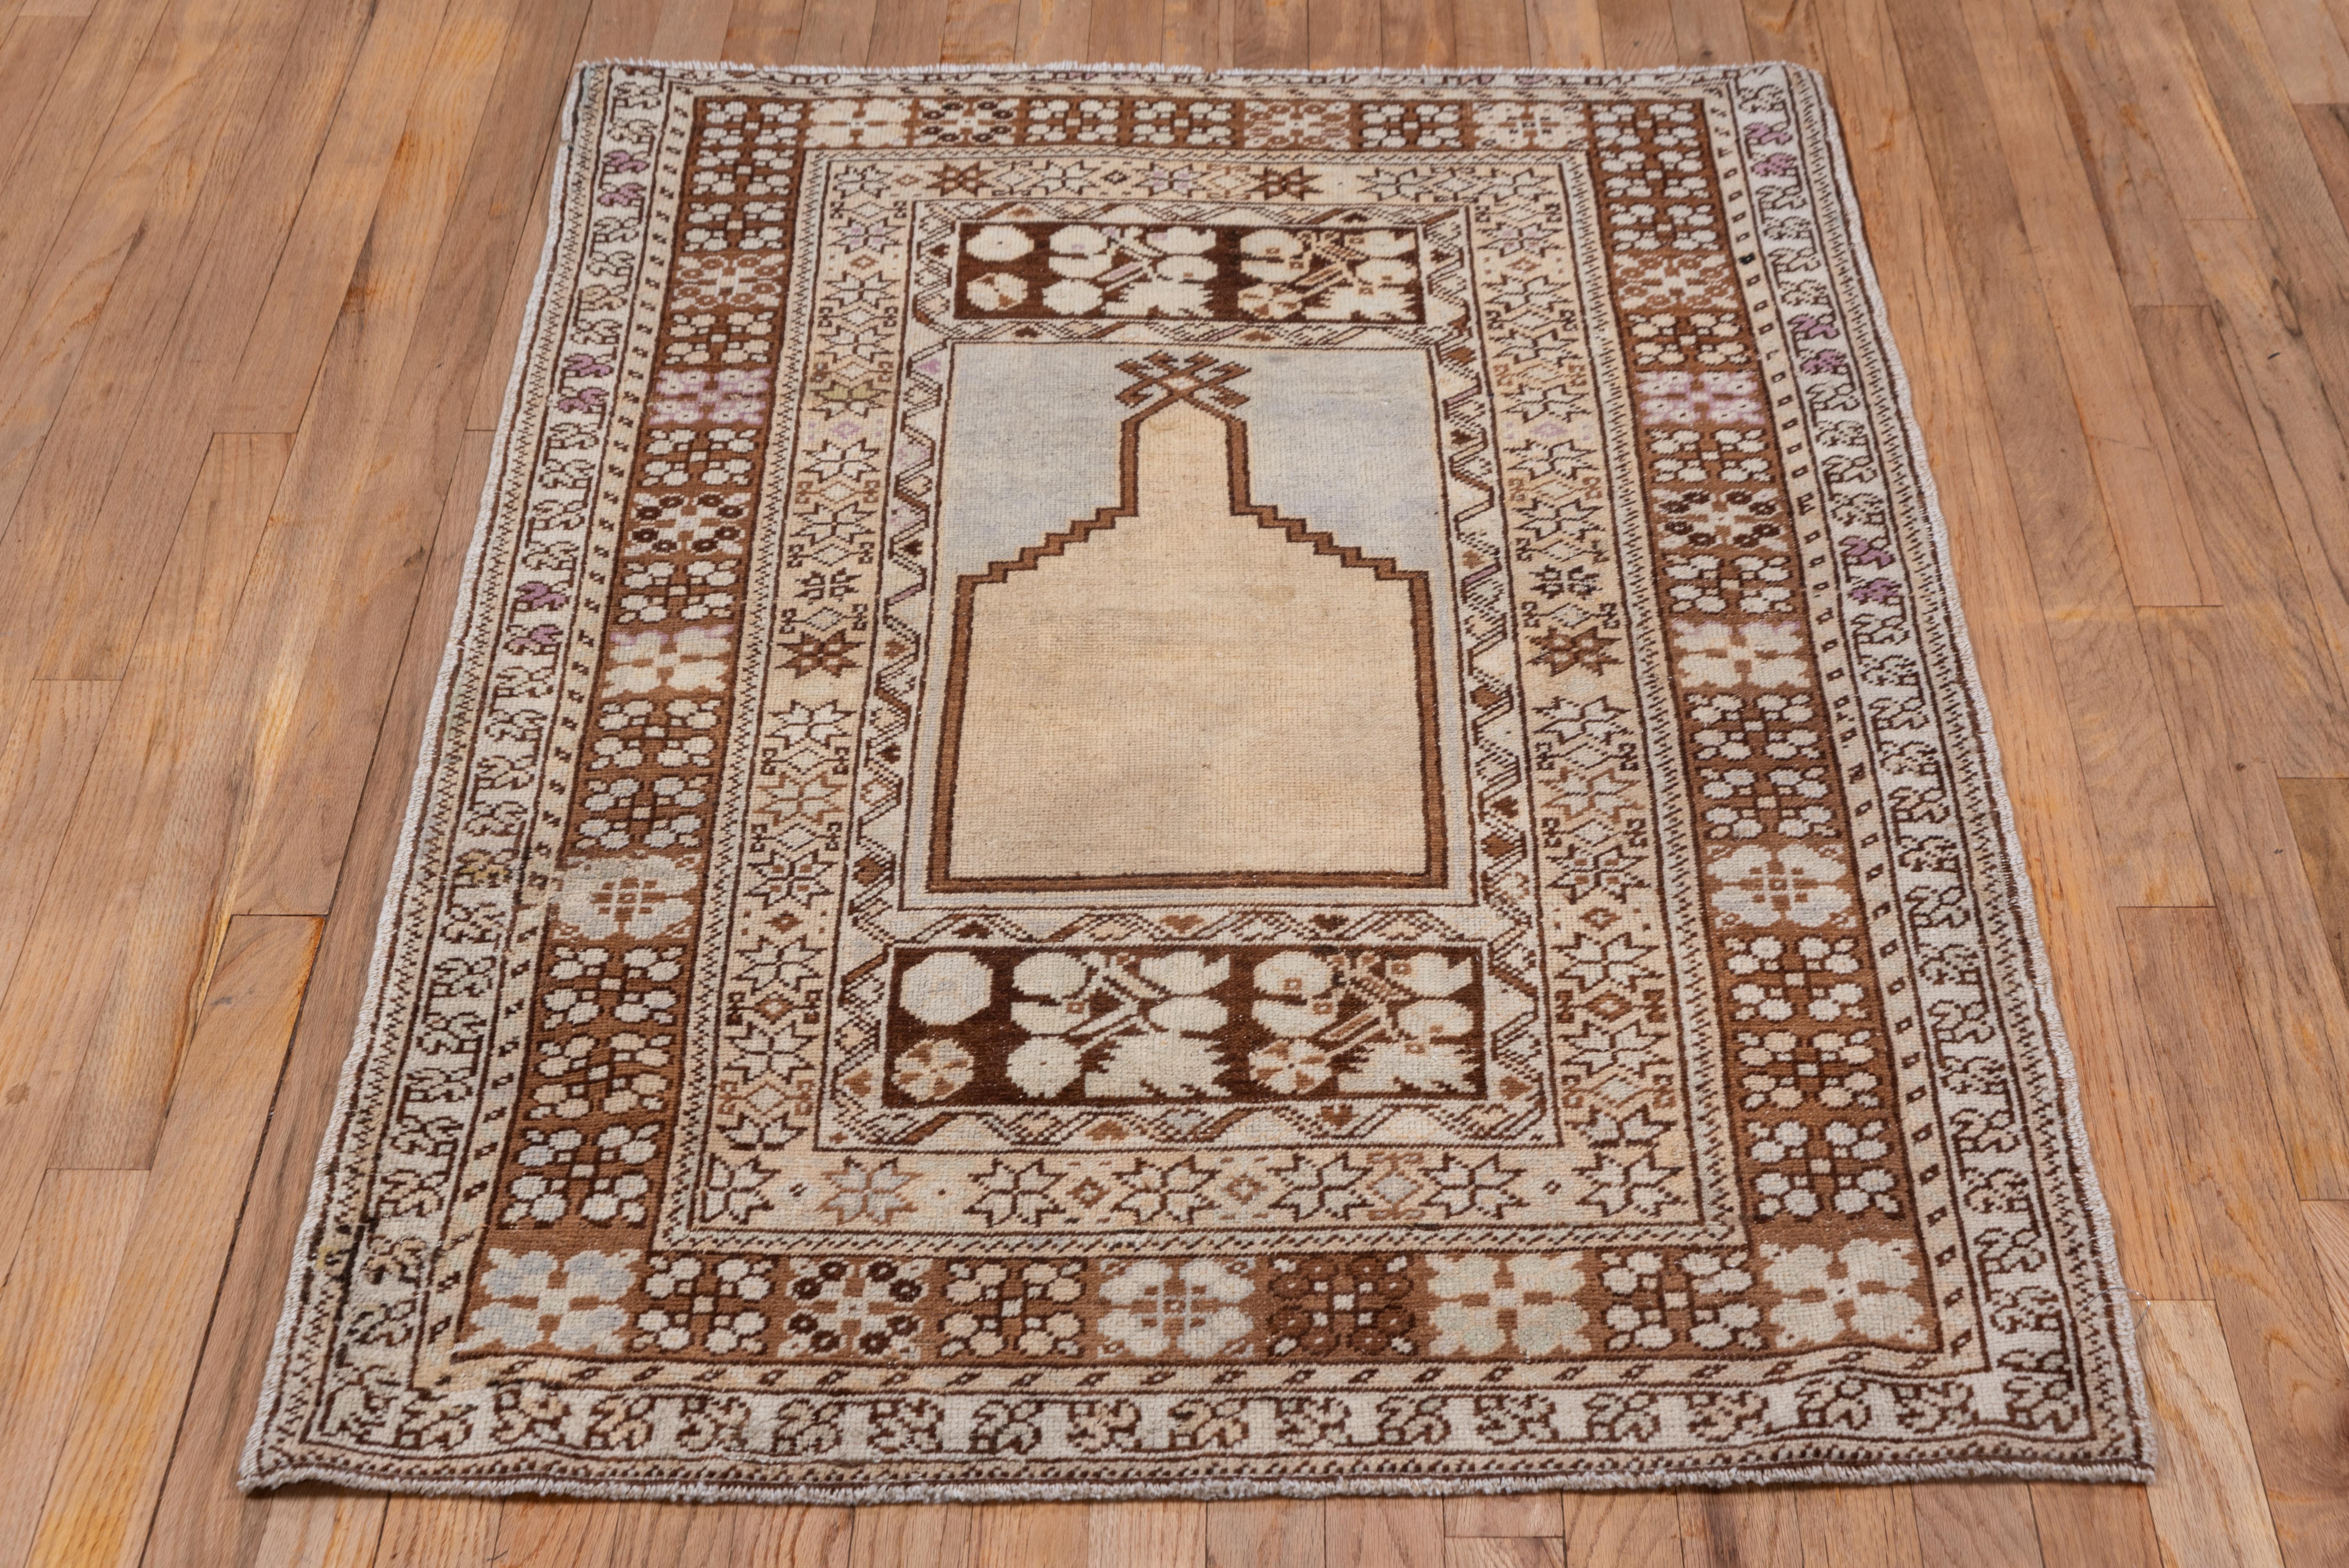 Antique Turkish Prayer Rug, Light Palette In Good Condition For Sale In New York, NY